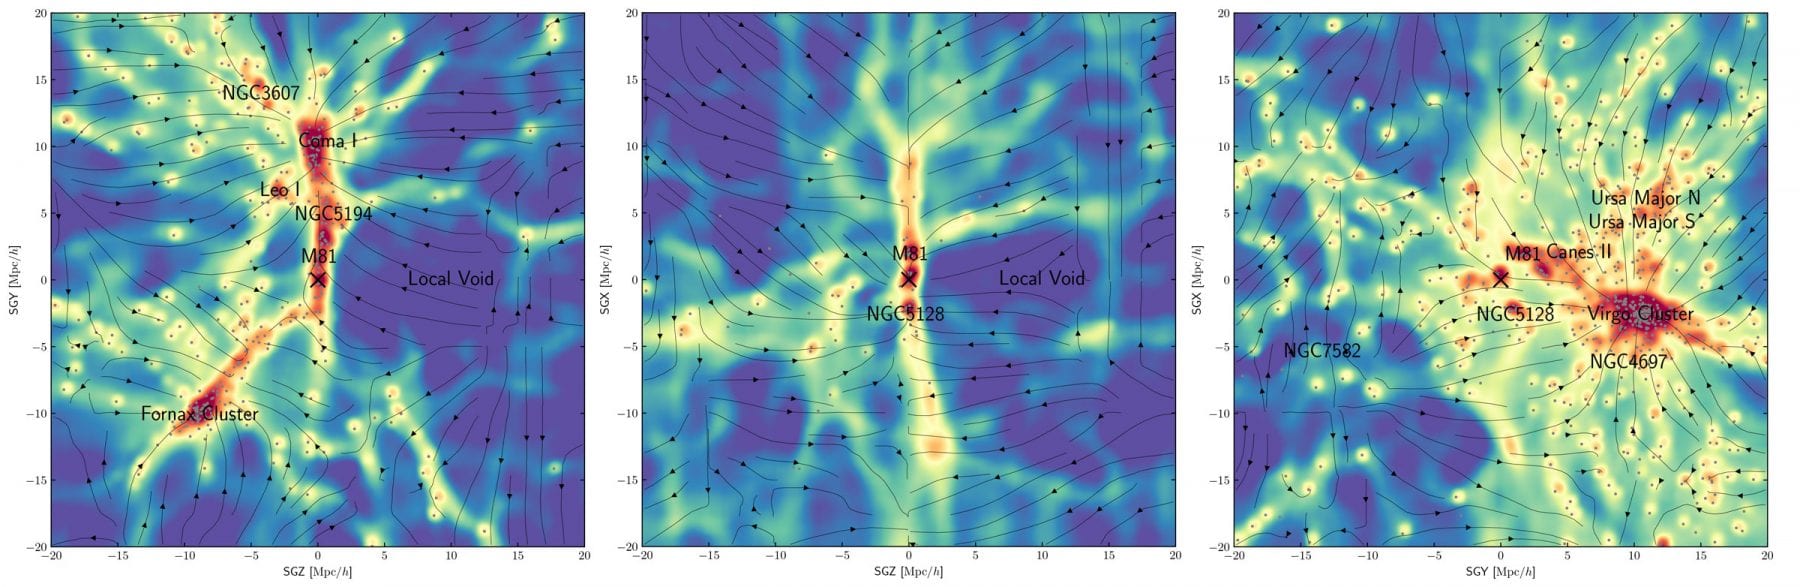 The map of dark matter of our local universe. The small X marks the Milky Way Galaxy where we are, while all the dots make up for other galaxies nearby. The arrows you see denote the motion of our local universe due to gravity. Credit: Hong et. al., Astrophysical Journal 